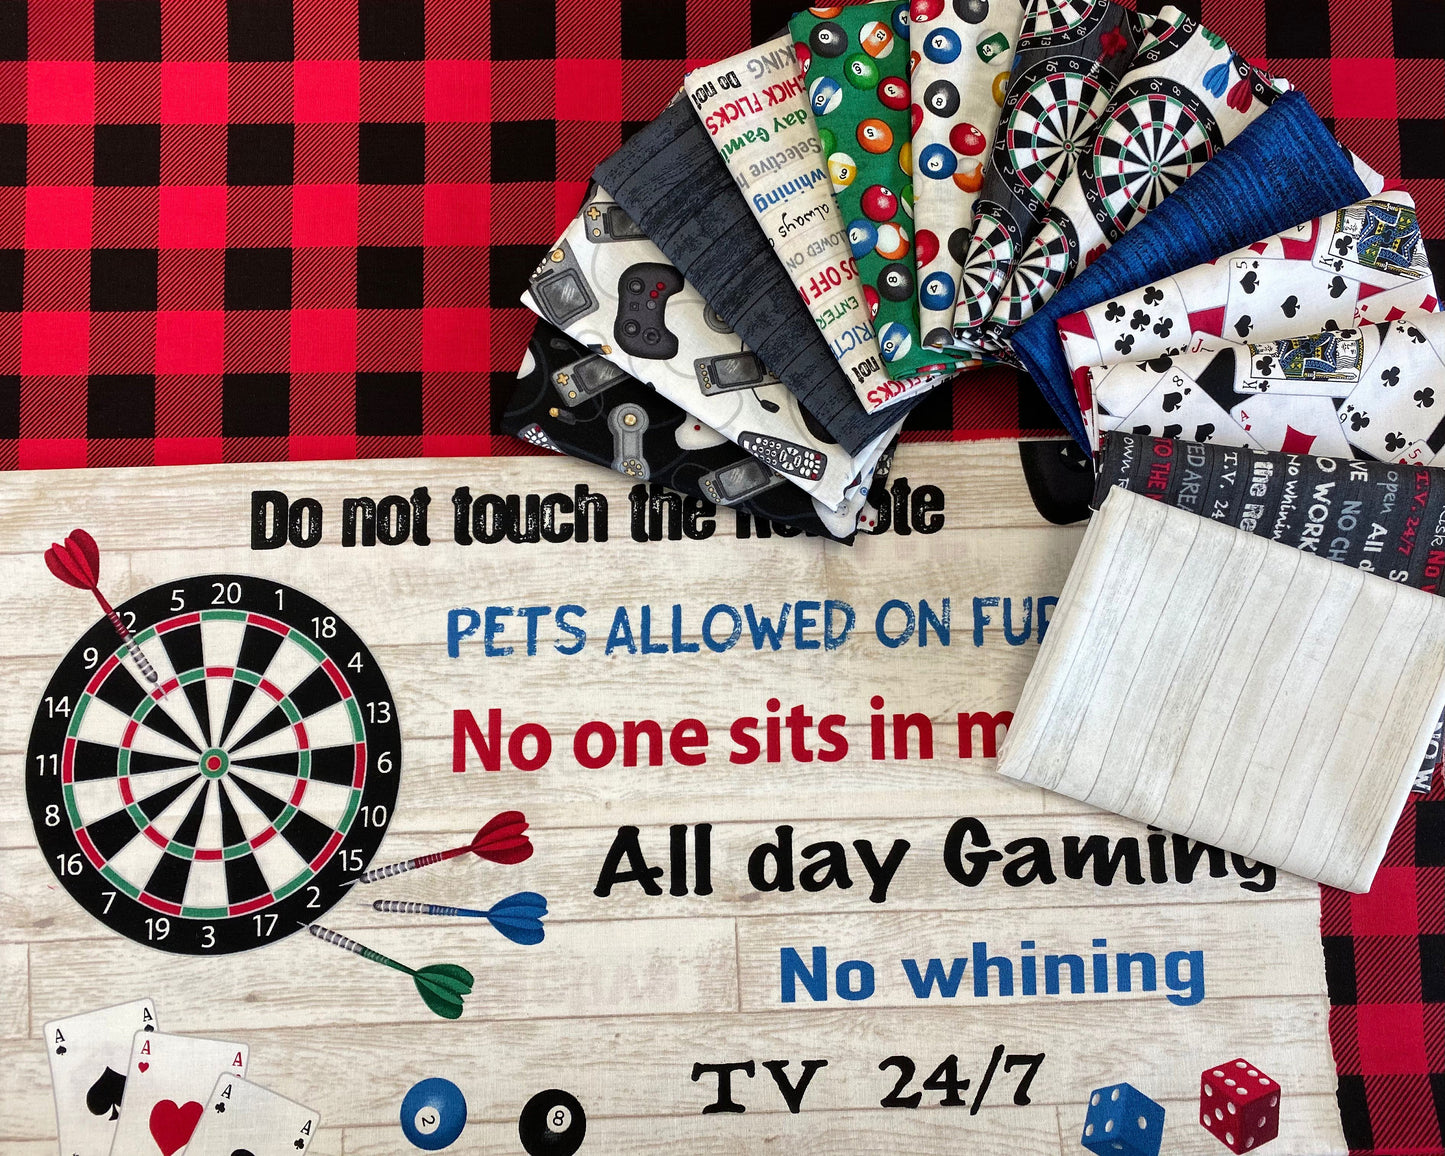 Man Cave by Rosemarie Lavin Dart Board 52413-5 Cotton Woven Fabric